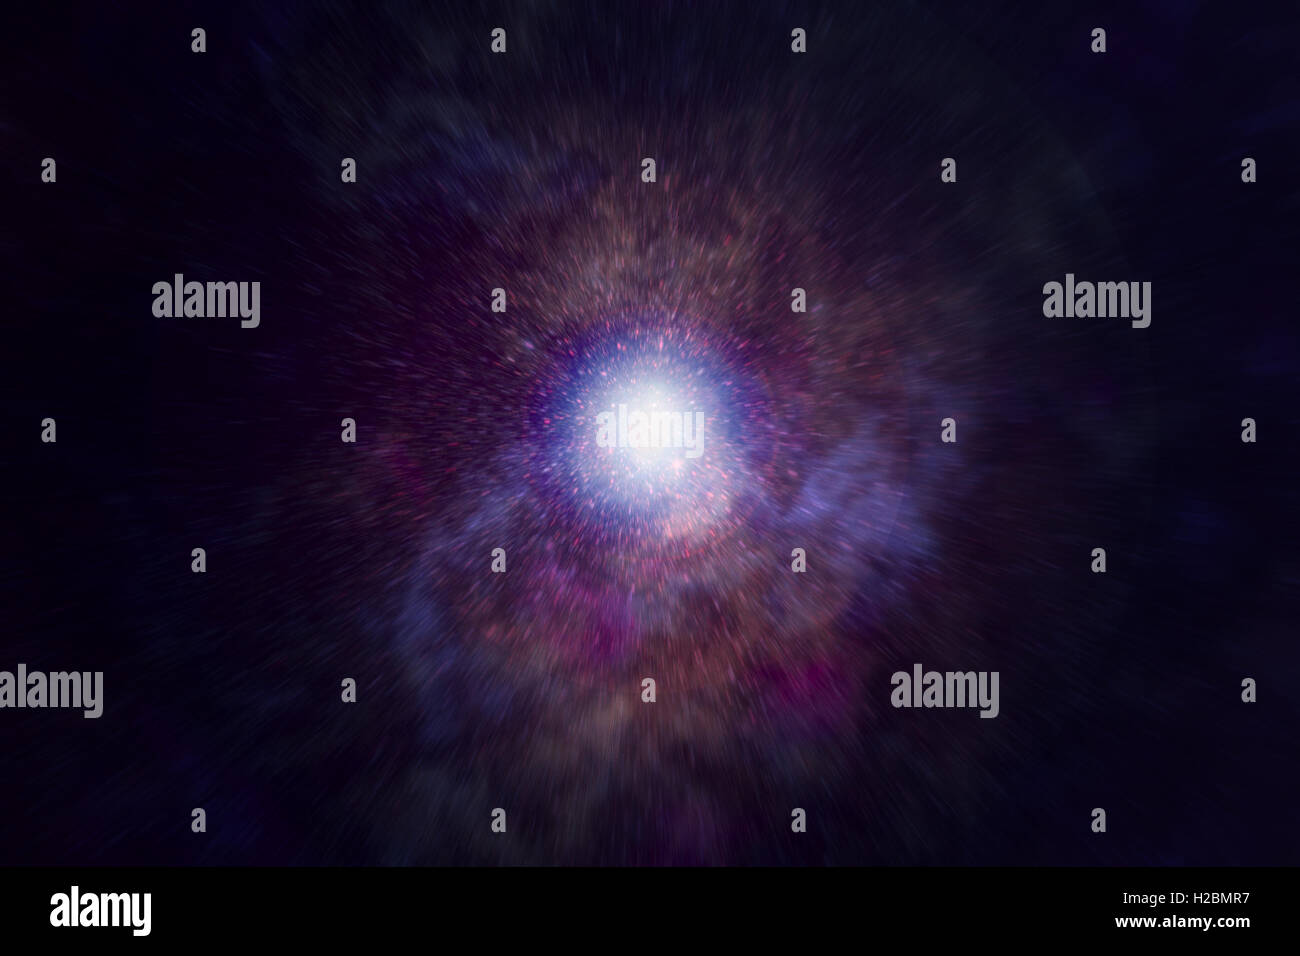 Background texture with artistic view on supernova explosion in purple. Stock Photo